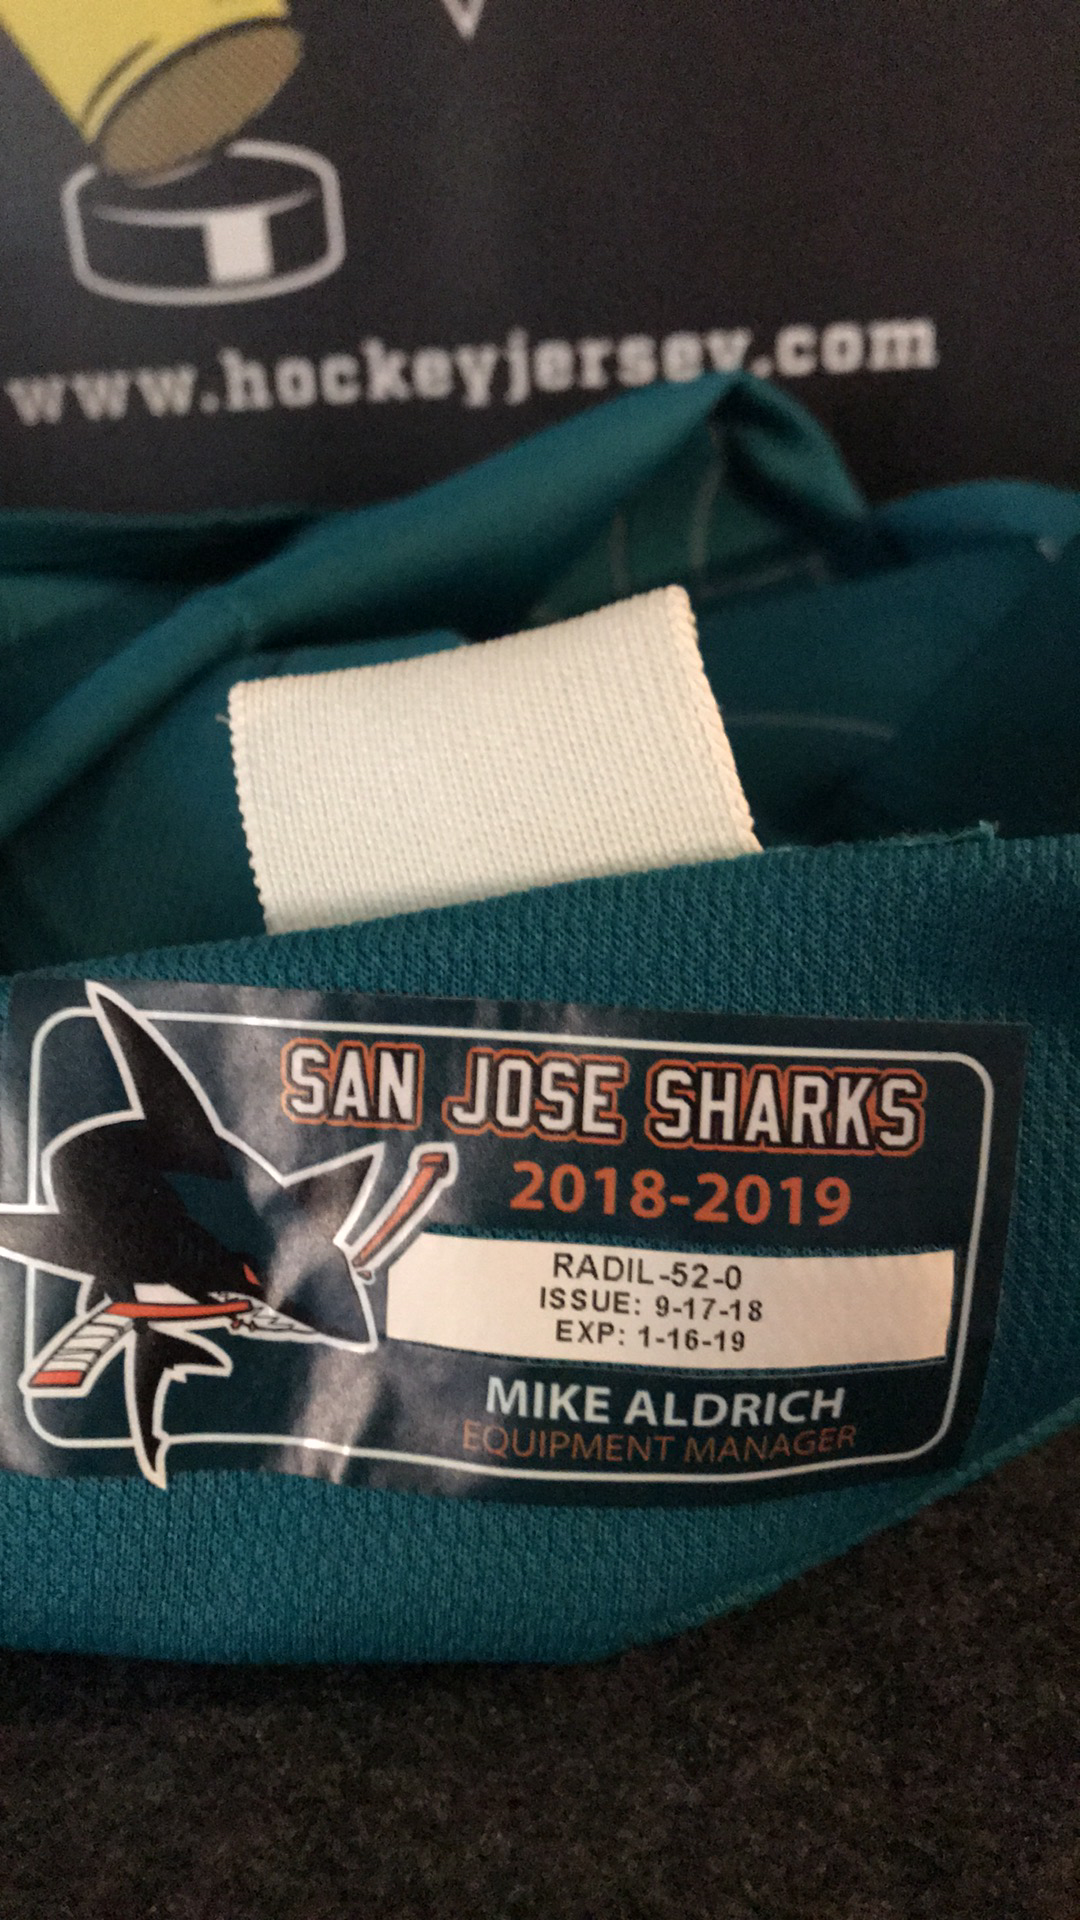 2018-19 San Jose Sharks #52 Lucas Radil with San Jose All-Star patch.  Looking for trade's only for older San Jose Sharks. – Hockey Jersey